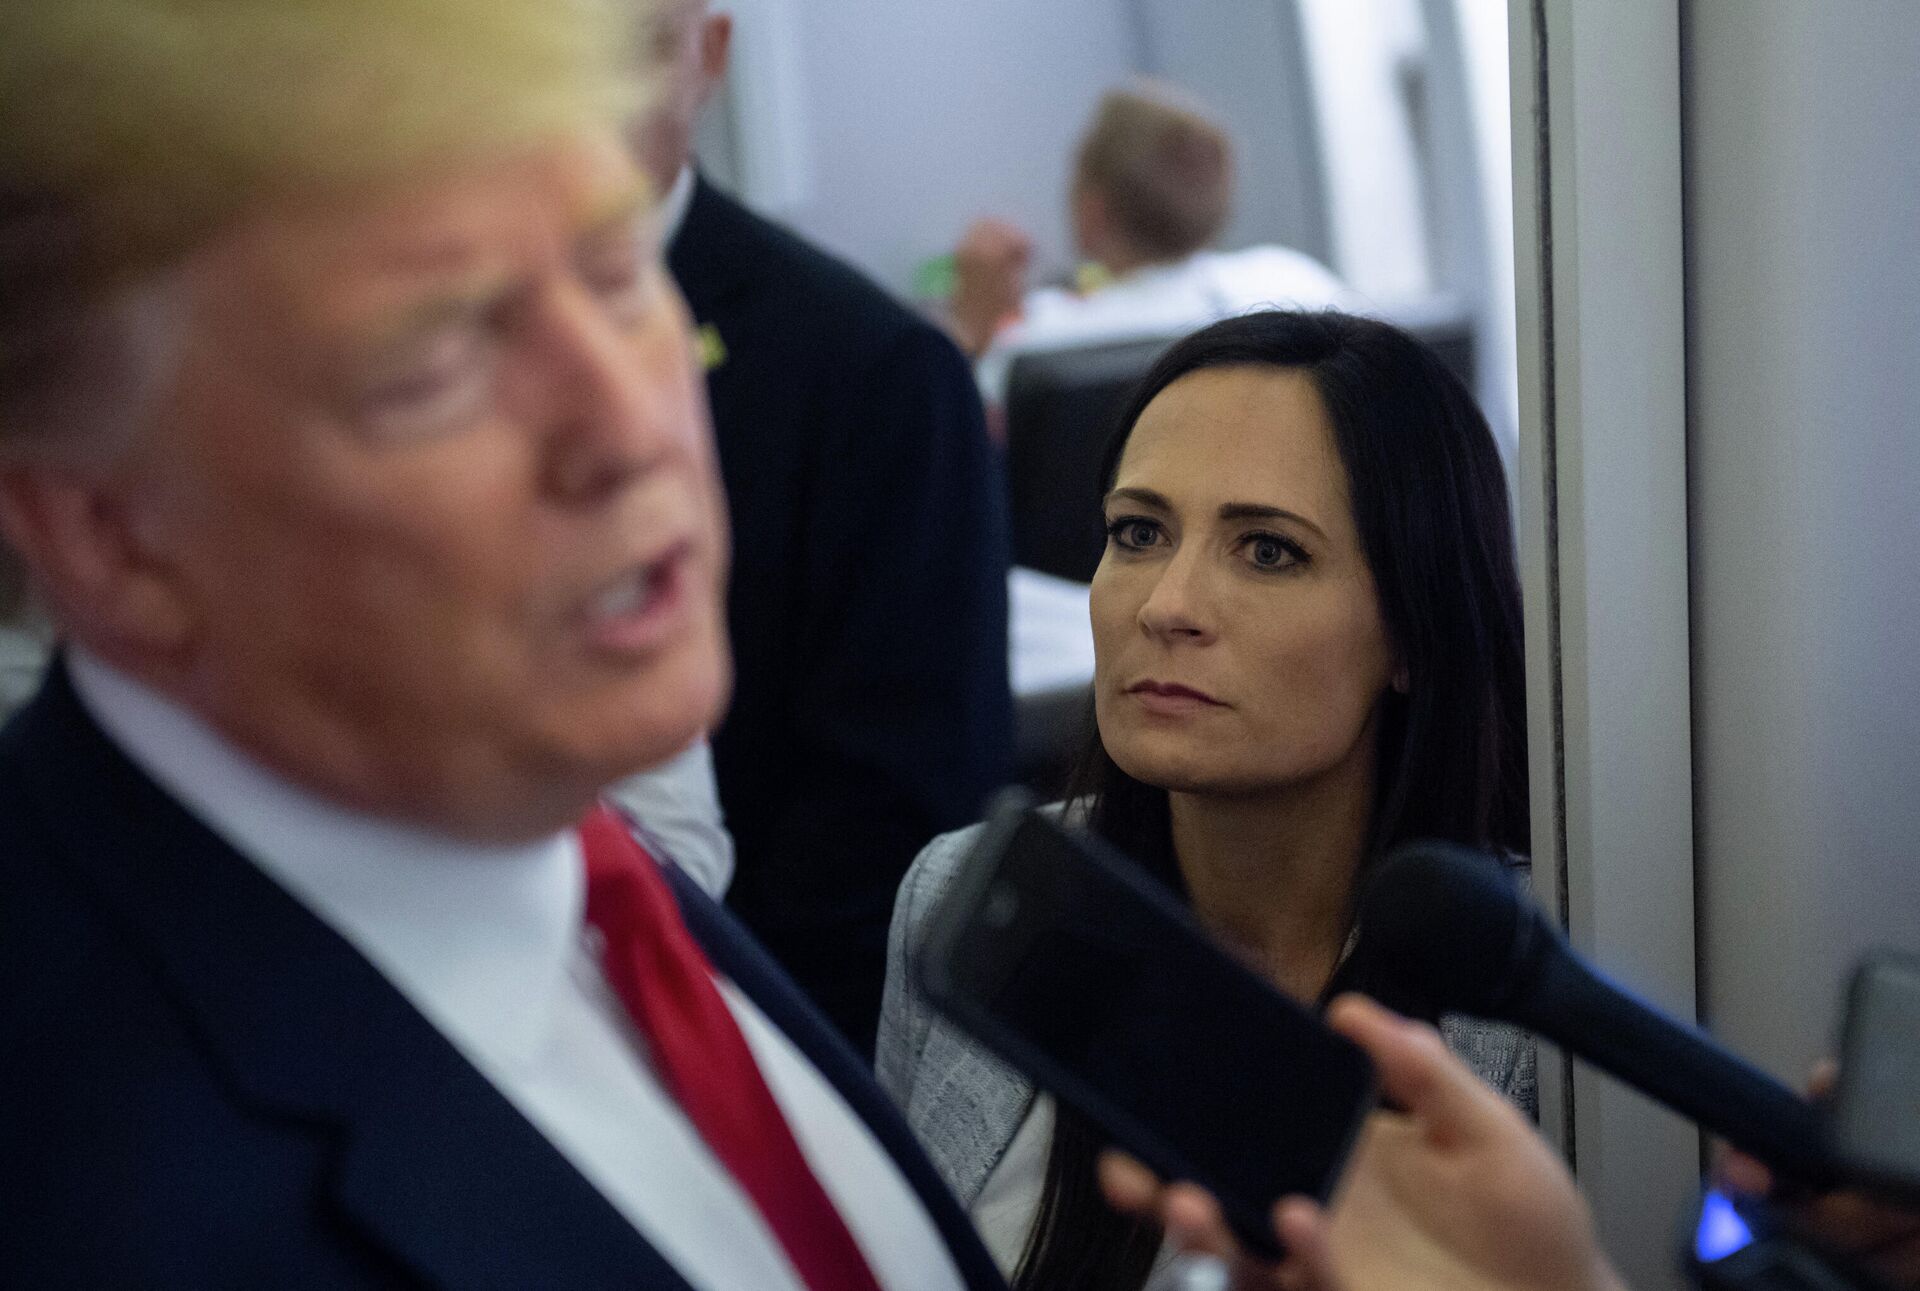 In this file photo former White House Press Secretary Stephanie Grisham listens as US President Donald Trump speaks to the media aboard Air Force One while flying between El Paso, Texas and Joint Base Andrews in Maryland, August 7, 2019. - An aide dubbed the Music Man was tasked with playing calming tunes for Donald Trump when he went into rages, according to a scandal-filled book by a former press secretary.Stephanie Grisham, notorious for not giving a single televised press conference while serving as Trump's chief spokeswoman, writes in I'll Take Your Questions Now that her boss went into terrifying rants.The former president and his wife Melania have vociferously condemned the book, excerpts of which appeared on September 28, 2021 in The New York Times and Washington Post. - Sputnik International, 1920, 06.10.2021